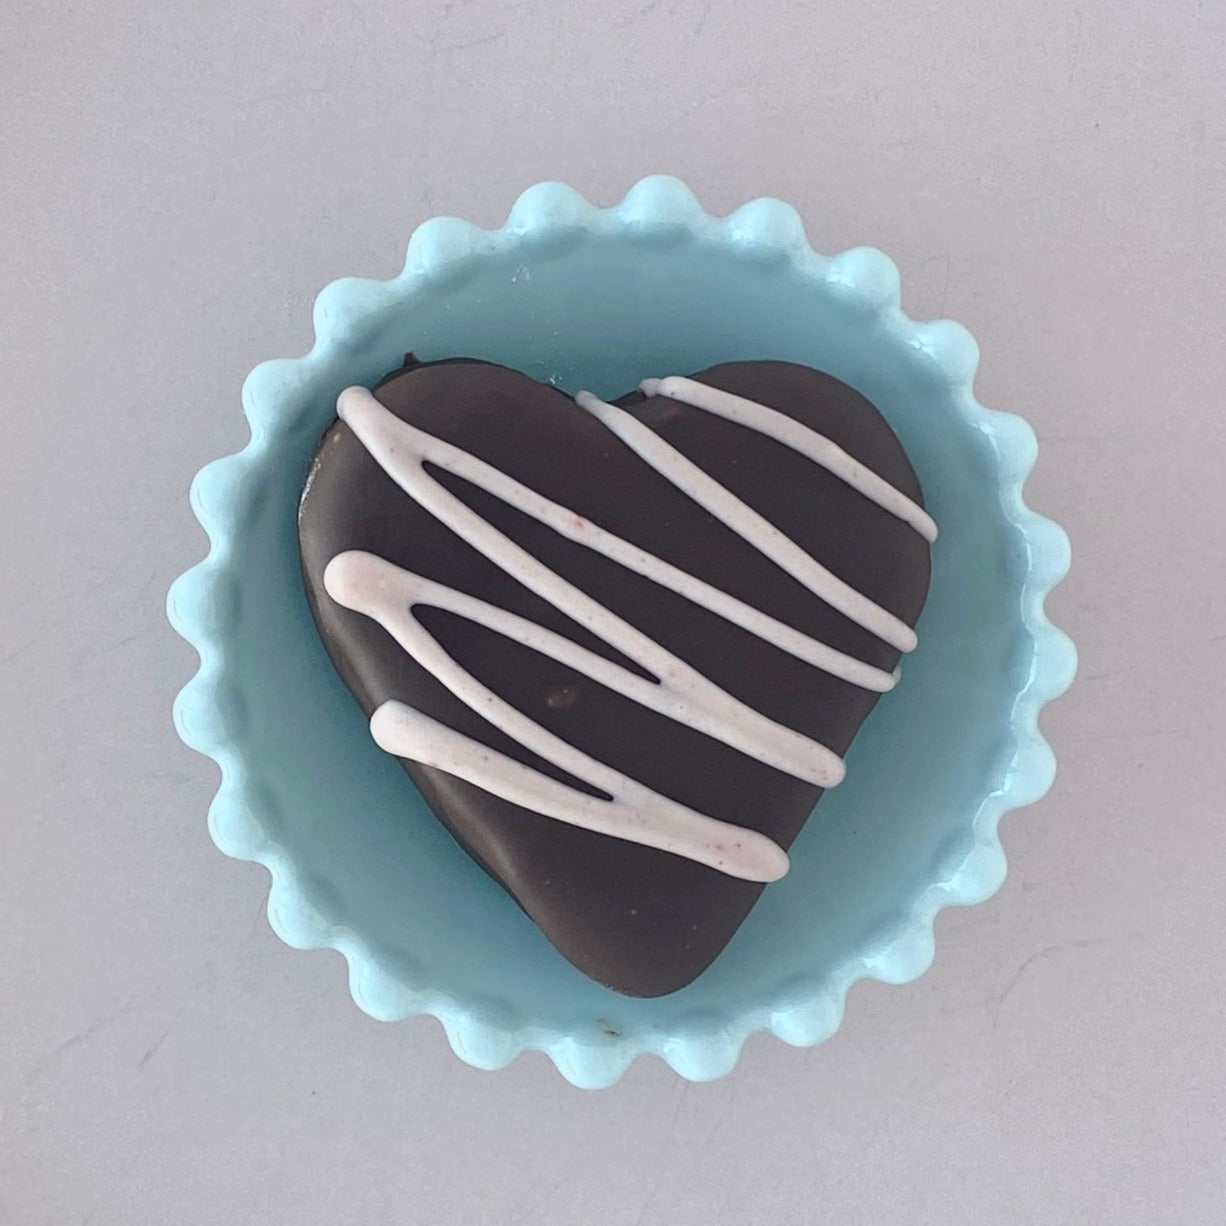 one dark chocolate-covered strawberry marshmallow sits in a blue scalloped bowl with pink chocolate drizzle